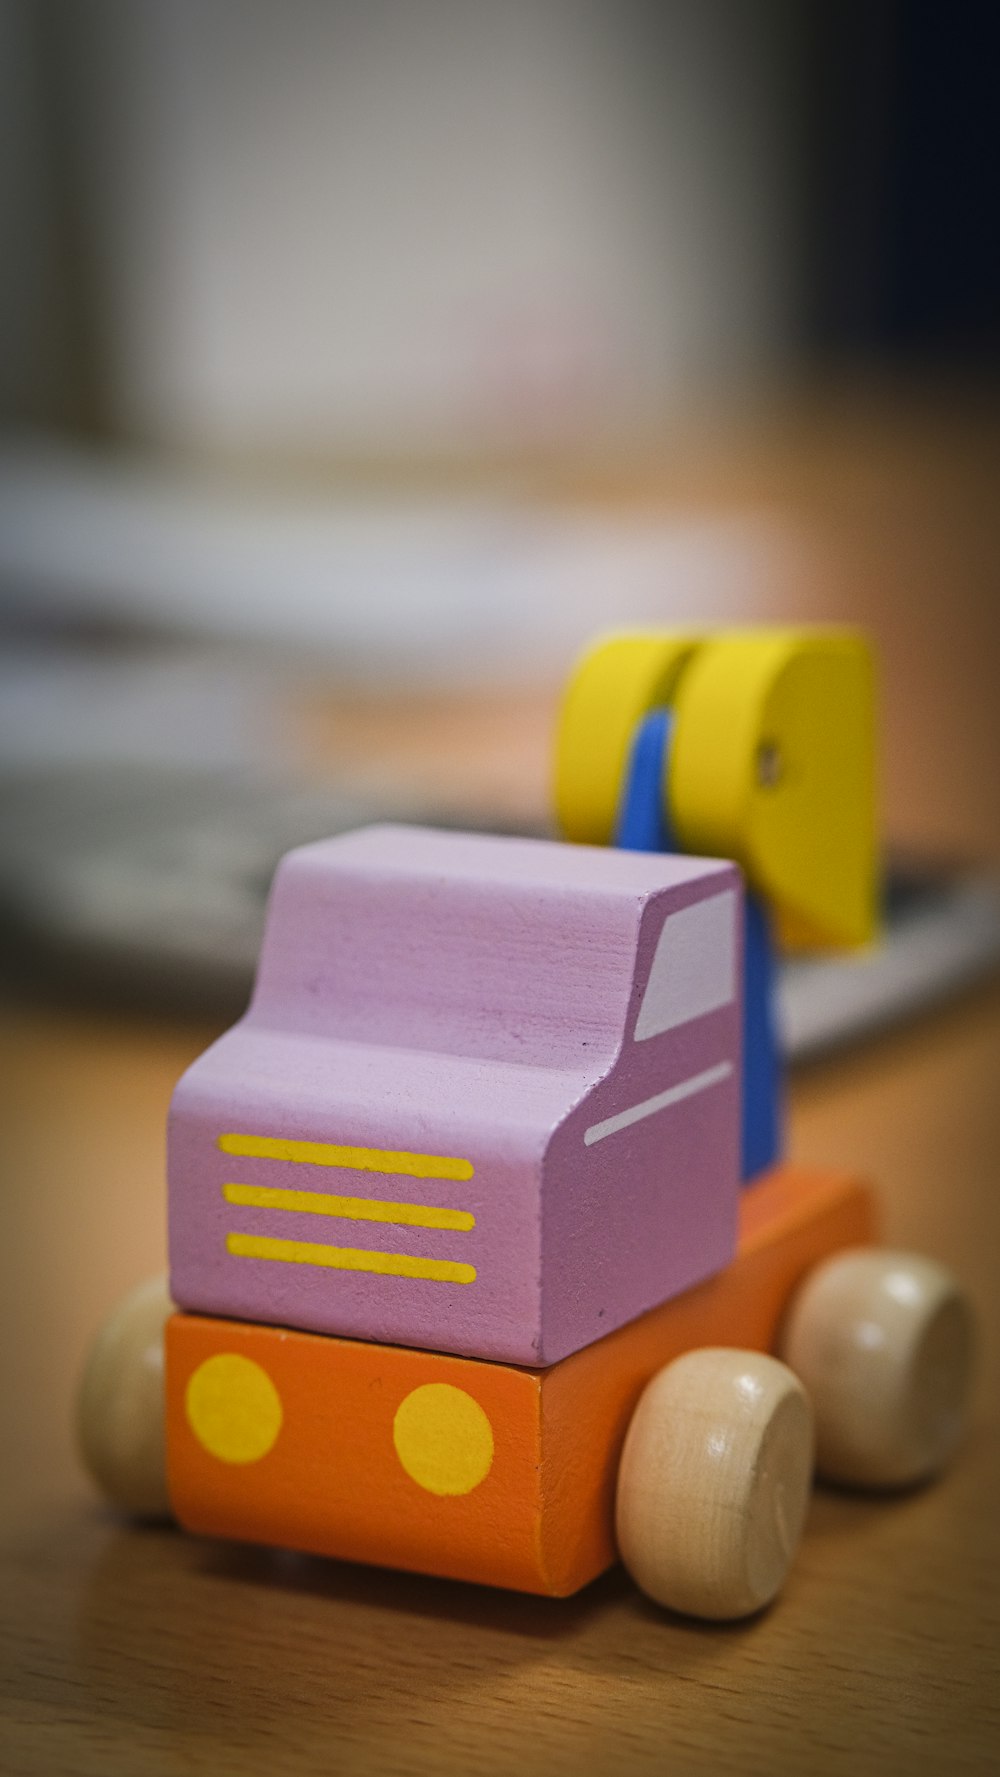 selective focus photography of orange and purple block car toy